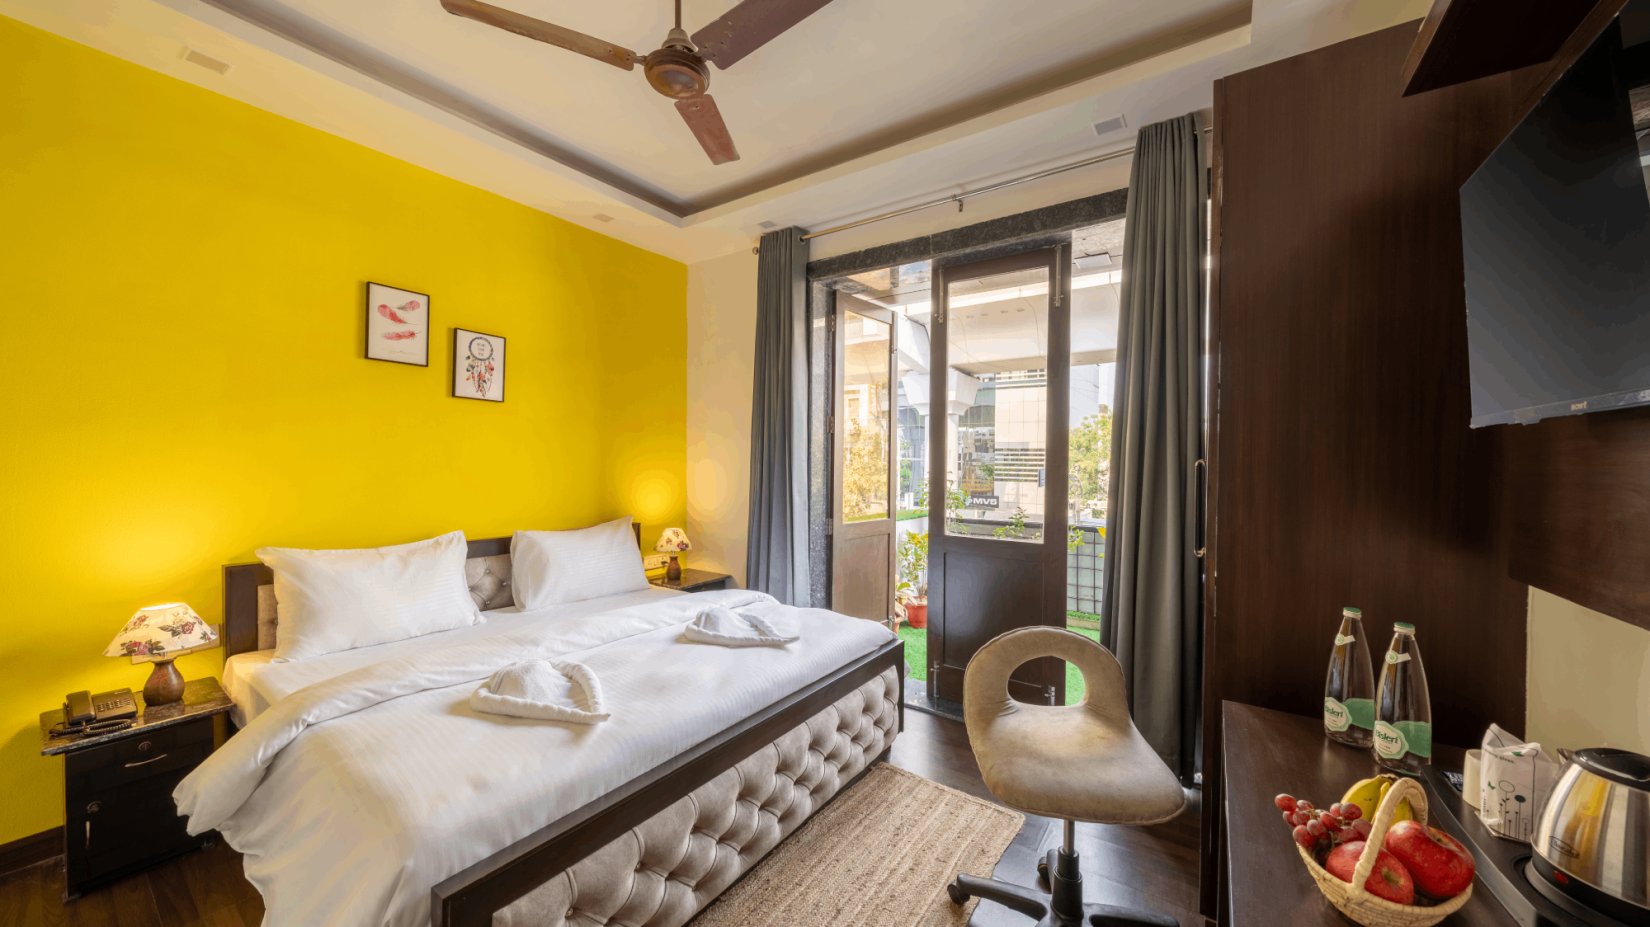 Hotels-in-Delhi-Lime-Stay-Bedroom-with-Balcony